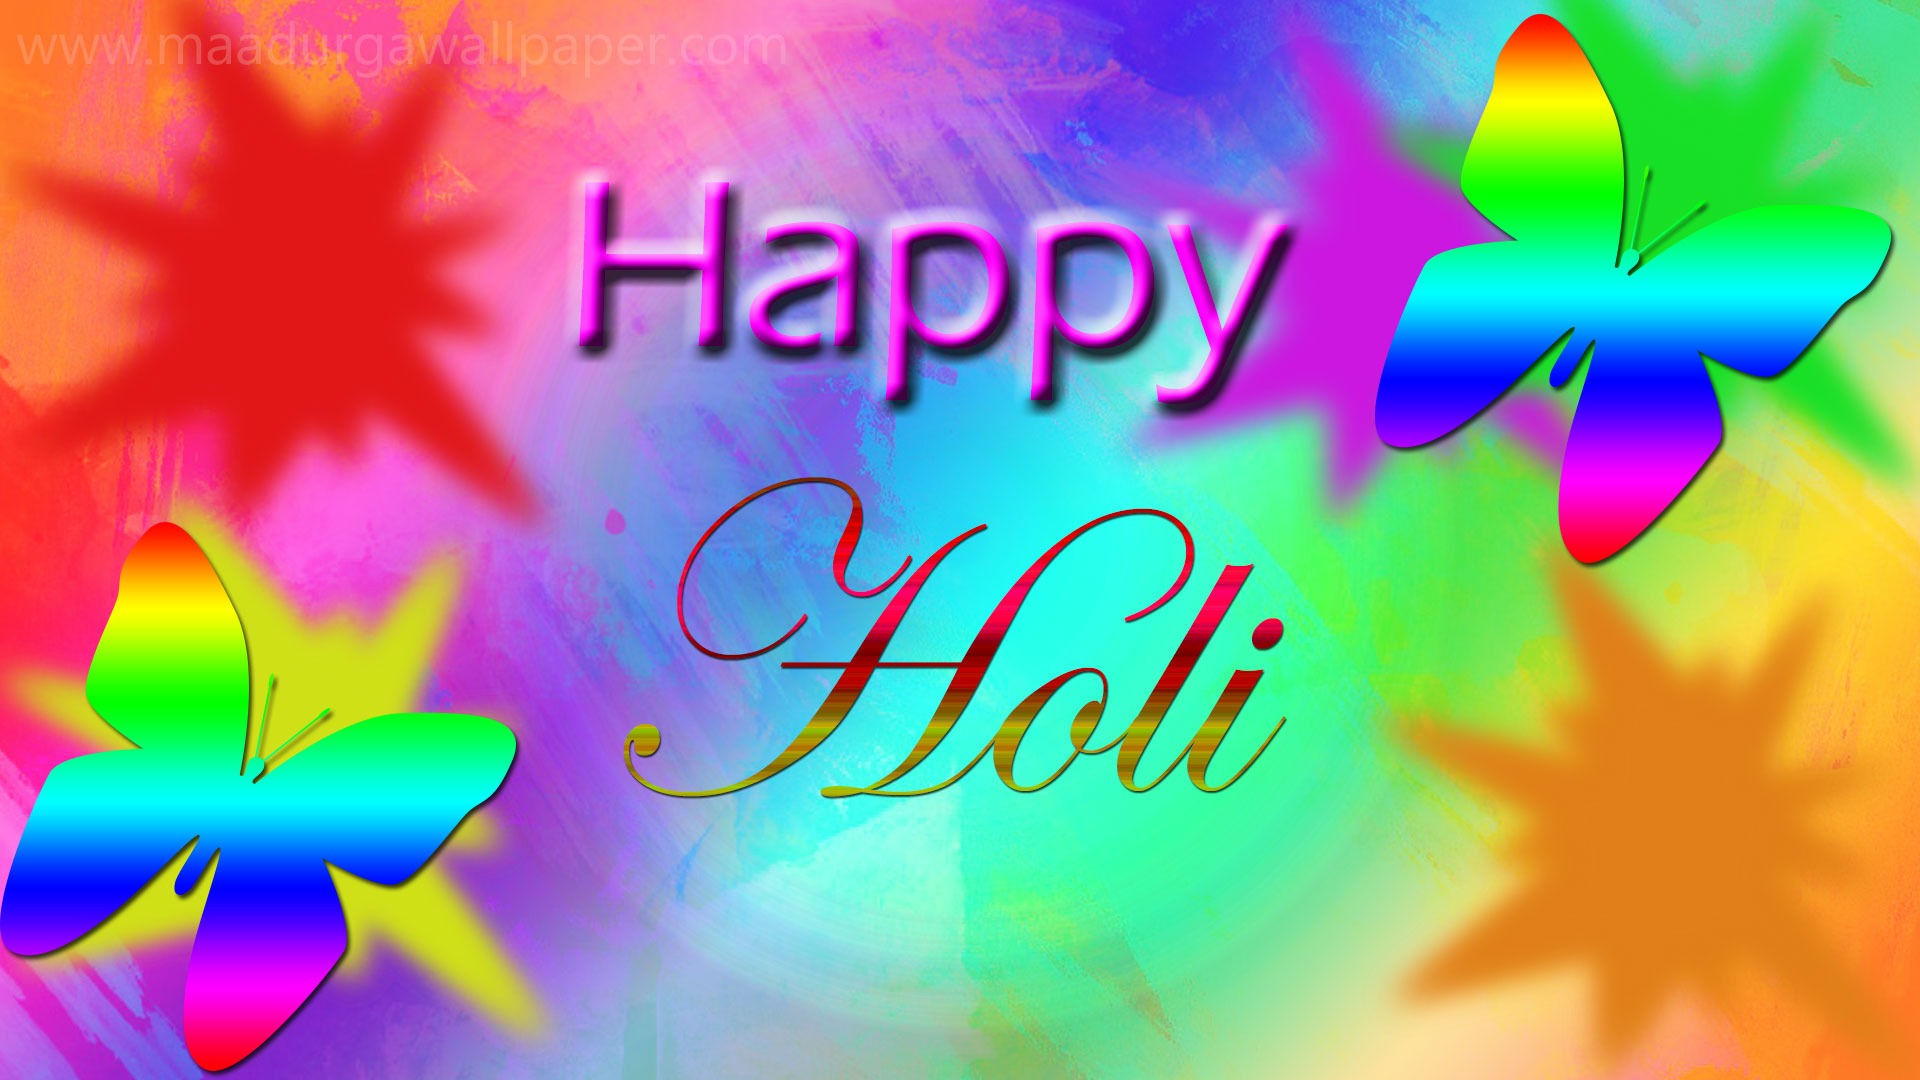 Happy Holi Images Greetings Hd Wallpapers - Happy Holi Images 2019 Hd - HD Wallpaper 